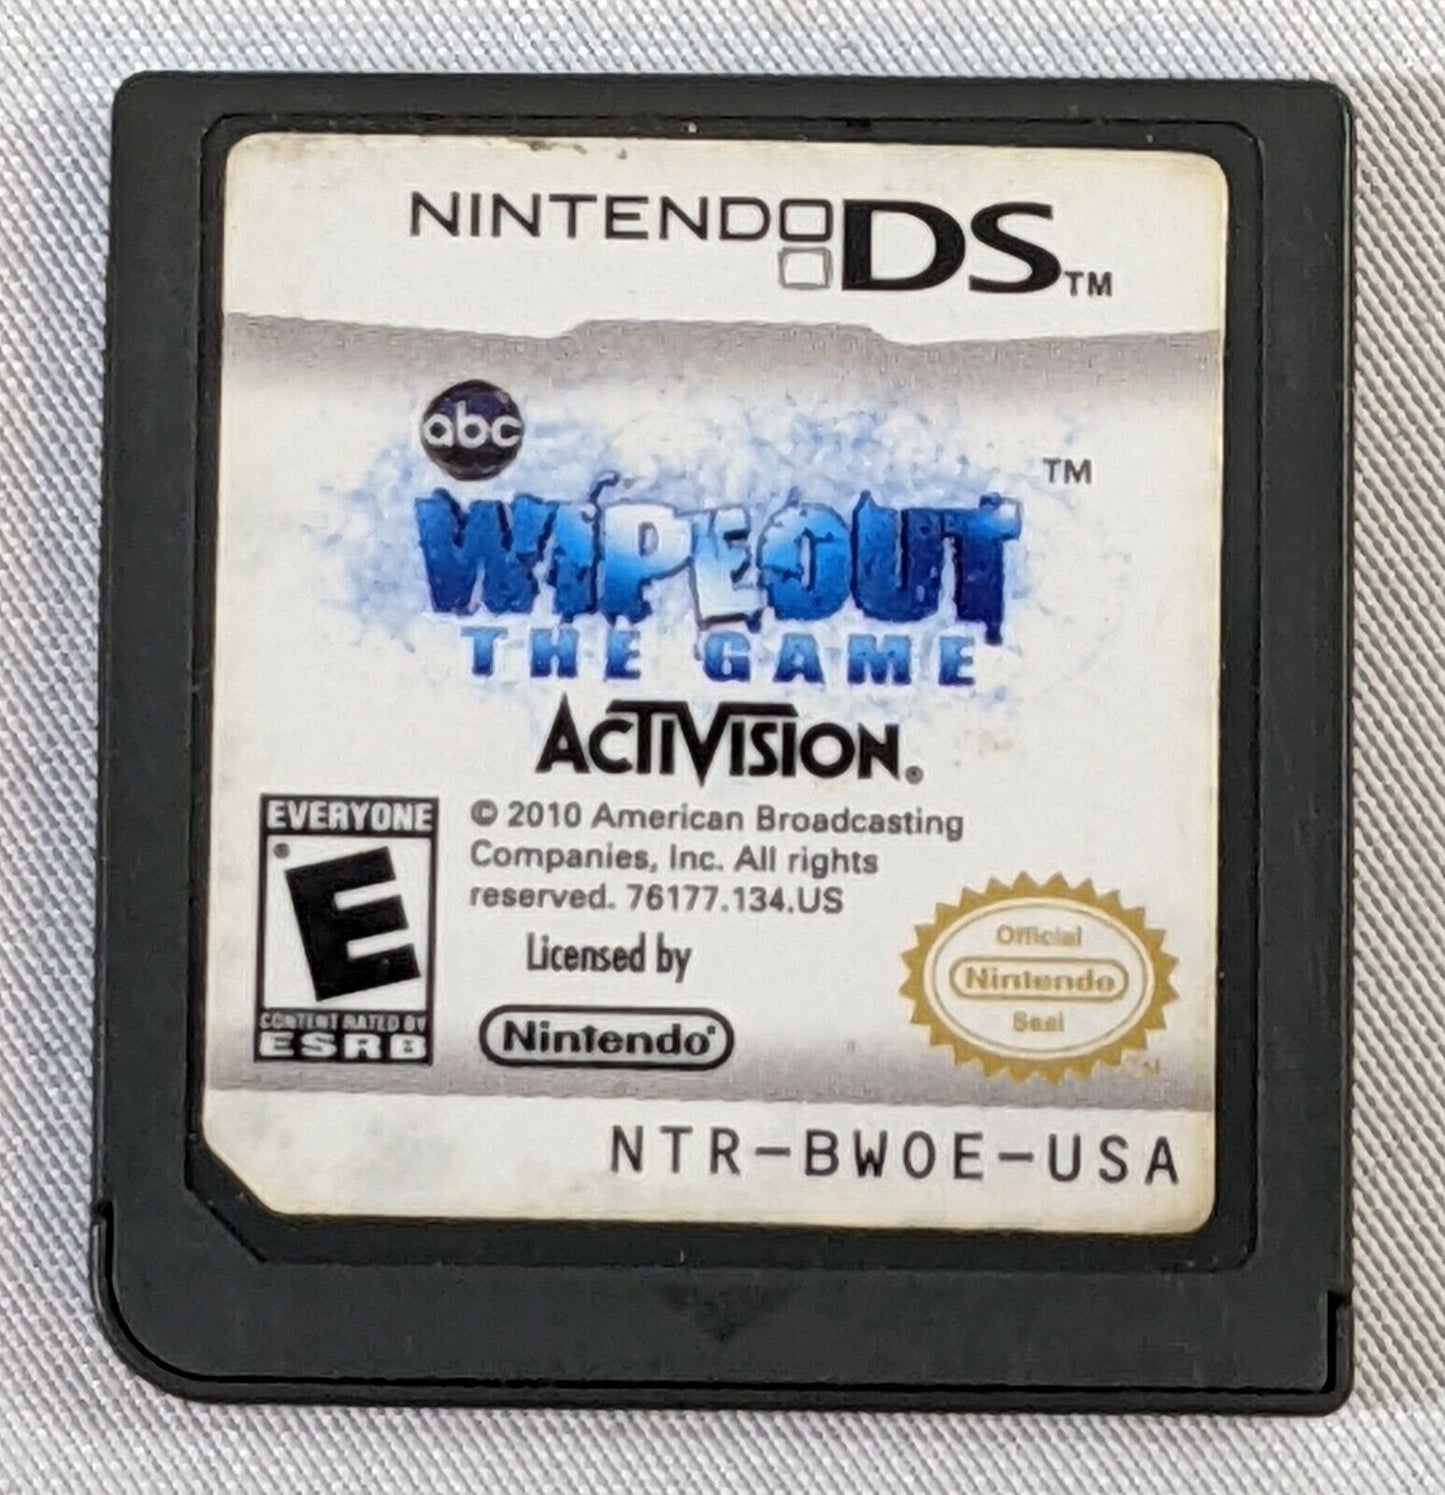 NDS Nintendo DS Wipeout The Game by Activision Video Game Cartridge Only